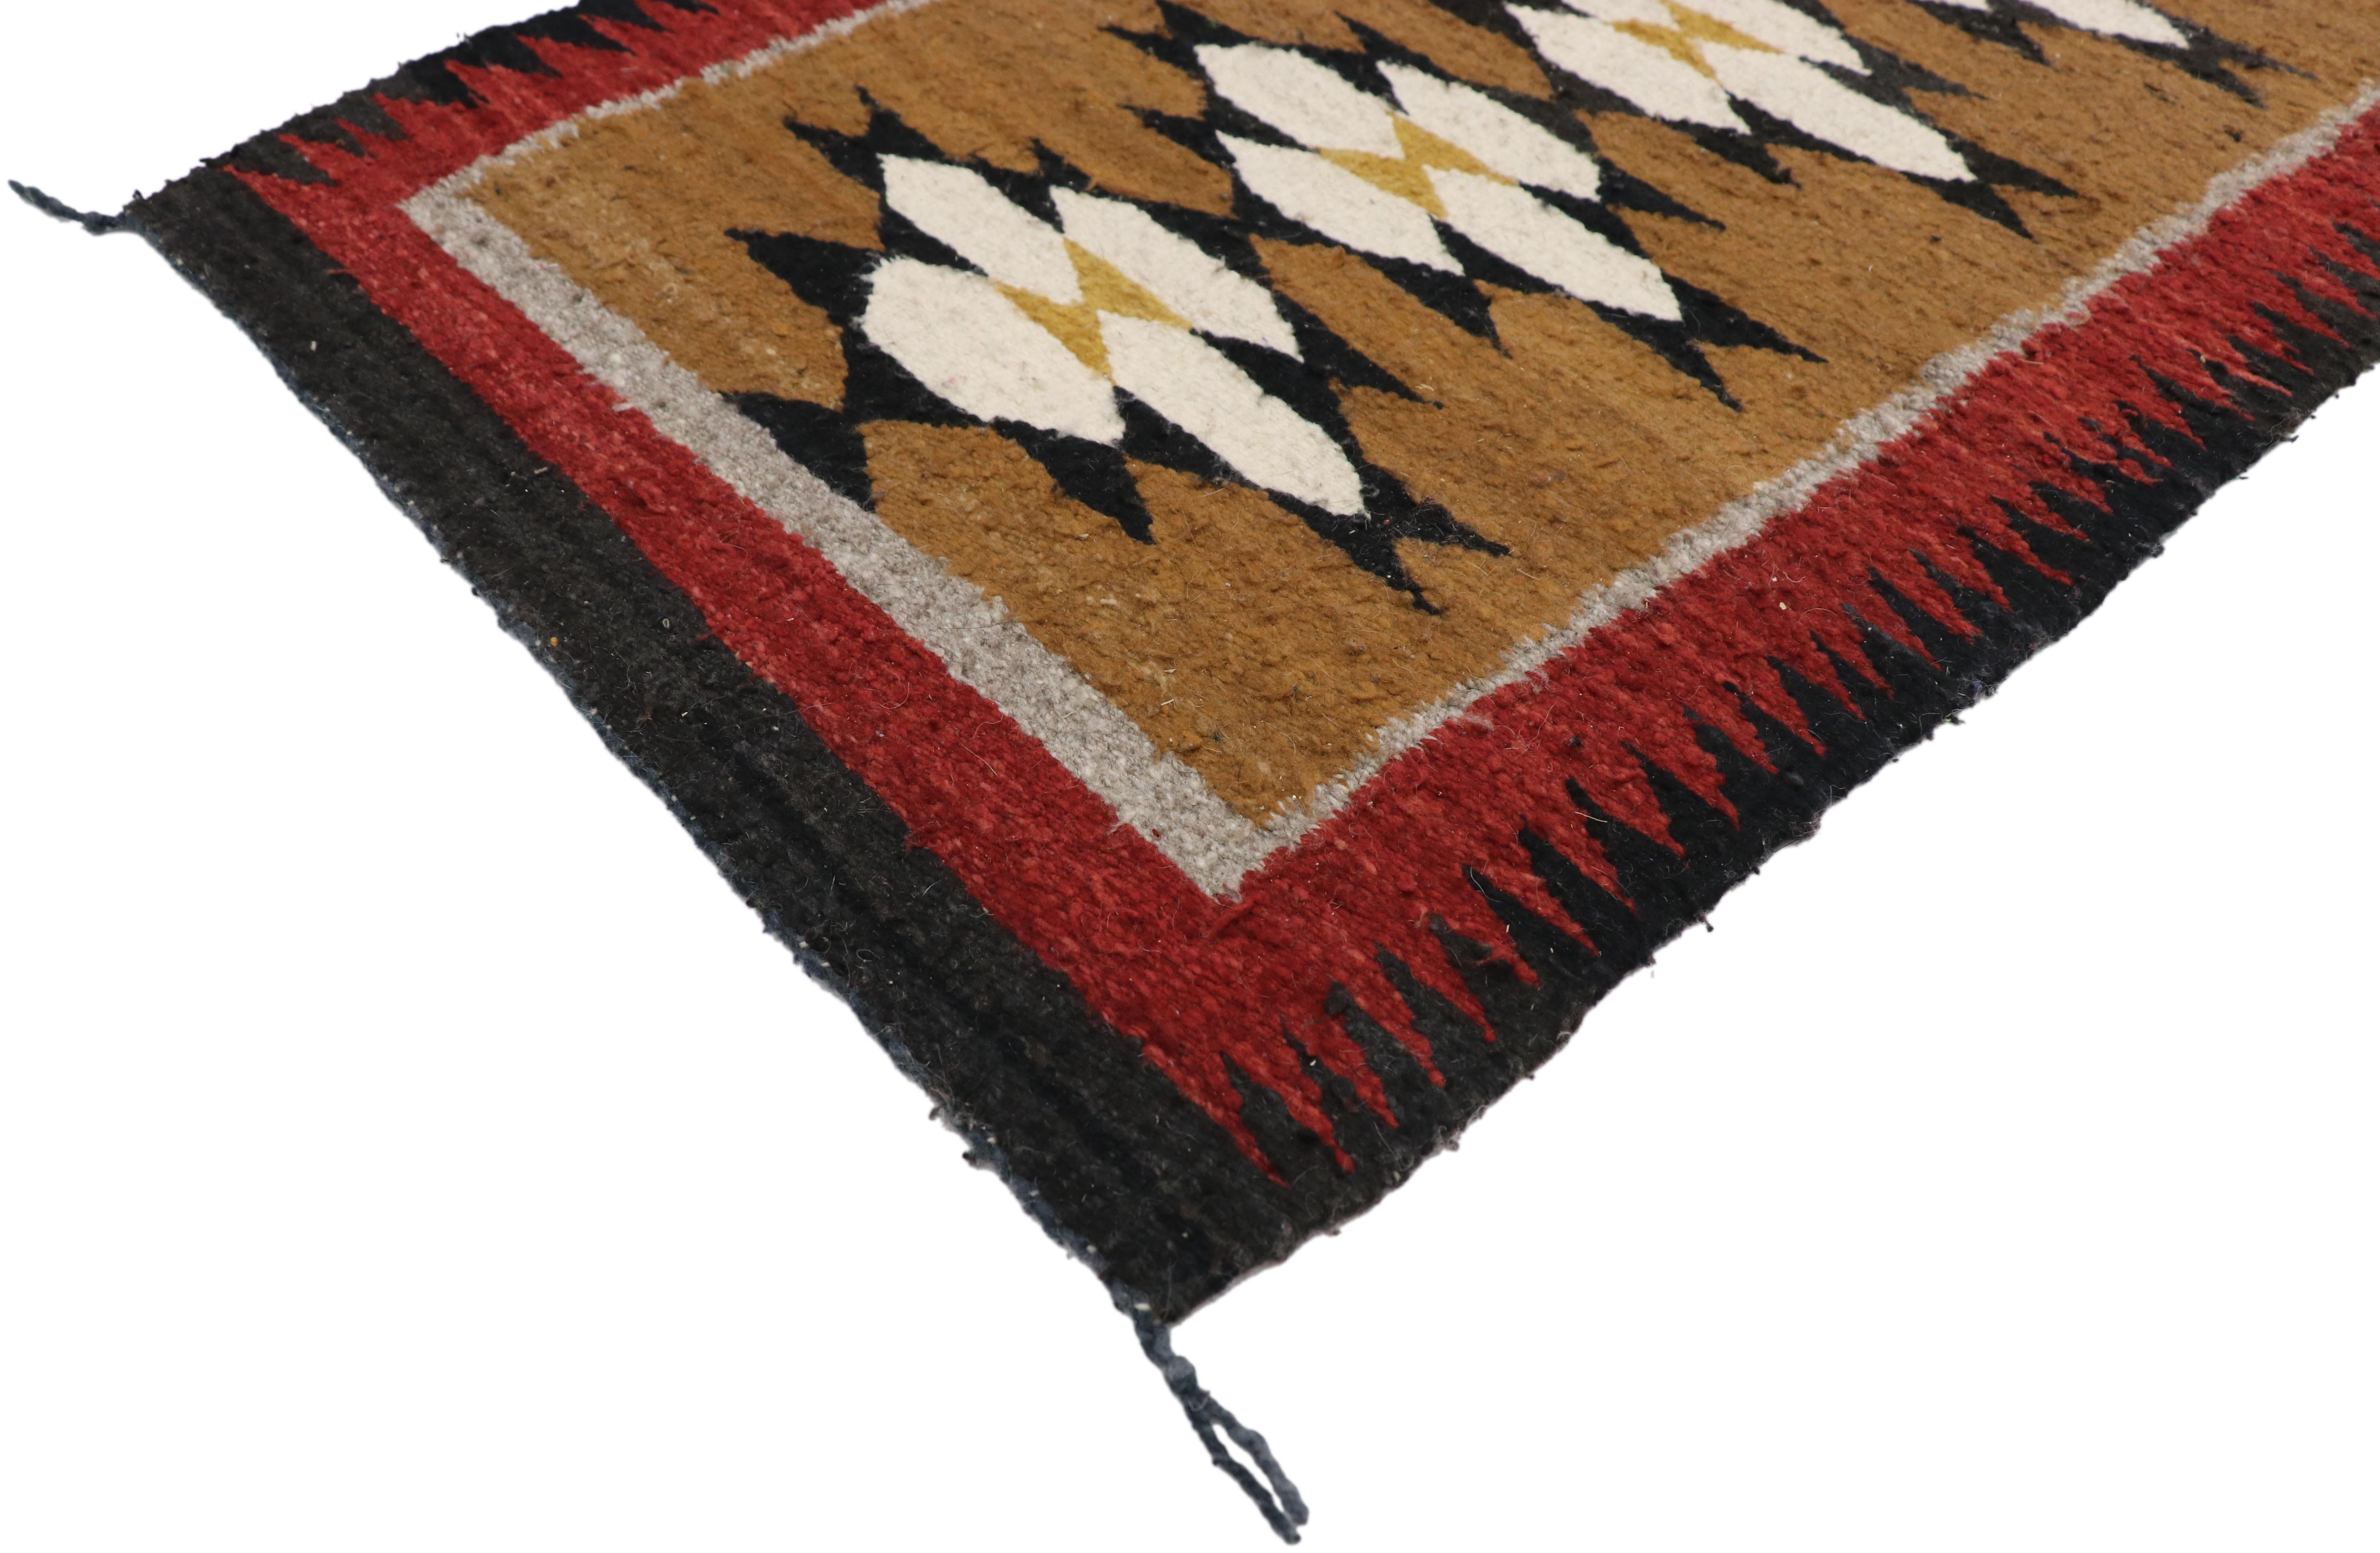 77341, native American Vintage Indian Navajo Kilim runner with Adirondack Lodge style. This handwoven wool Native American vintage Indian Navajo kilim runner features fused triangles symbolizing the wings of the butterfly which represents